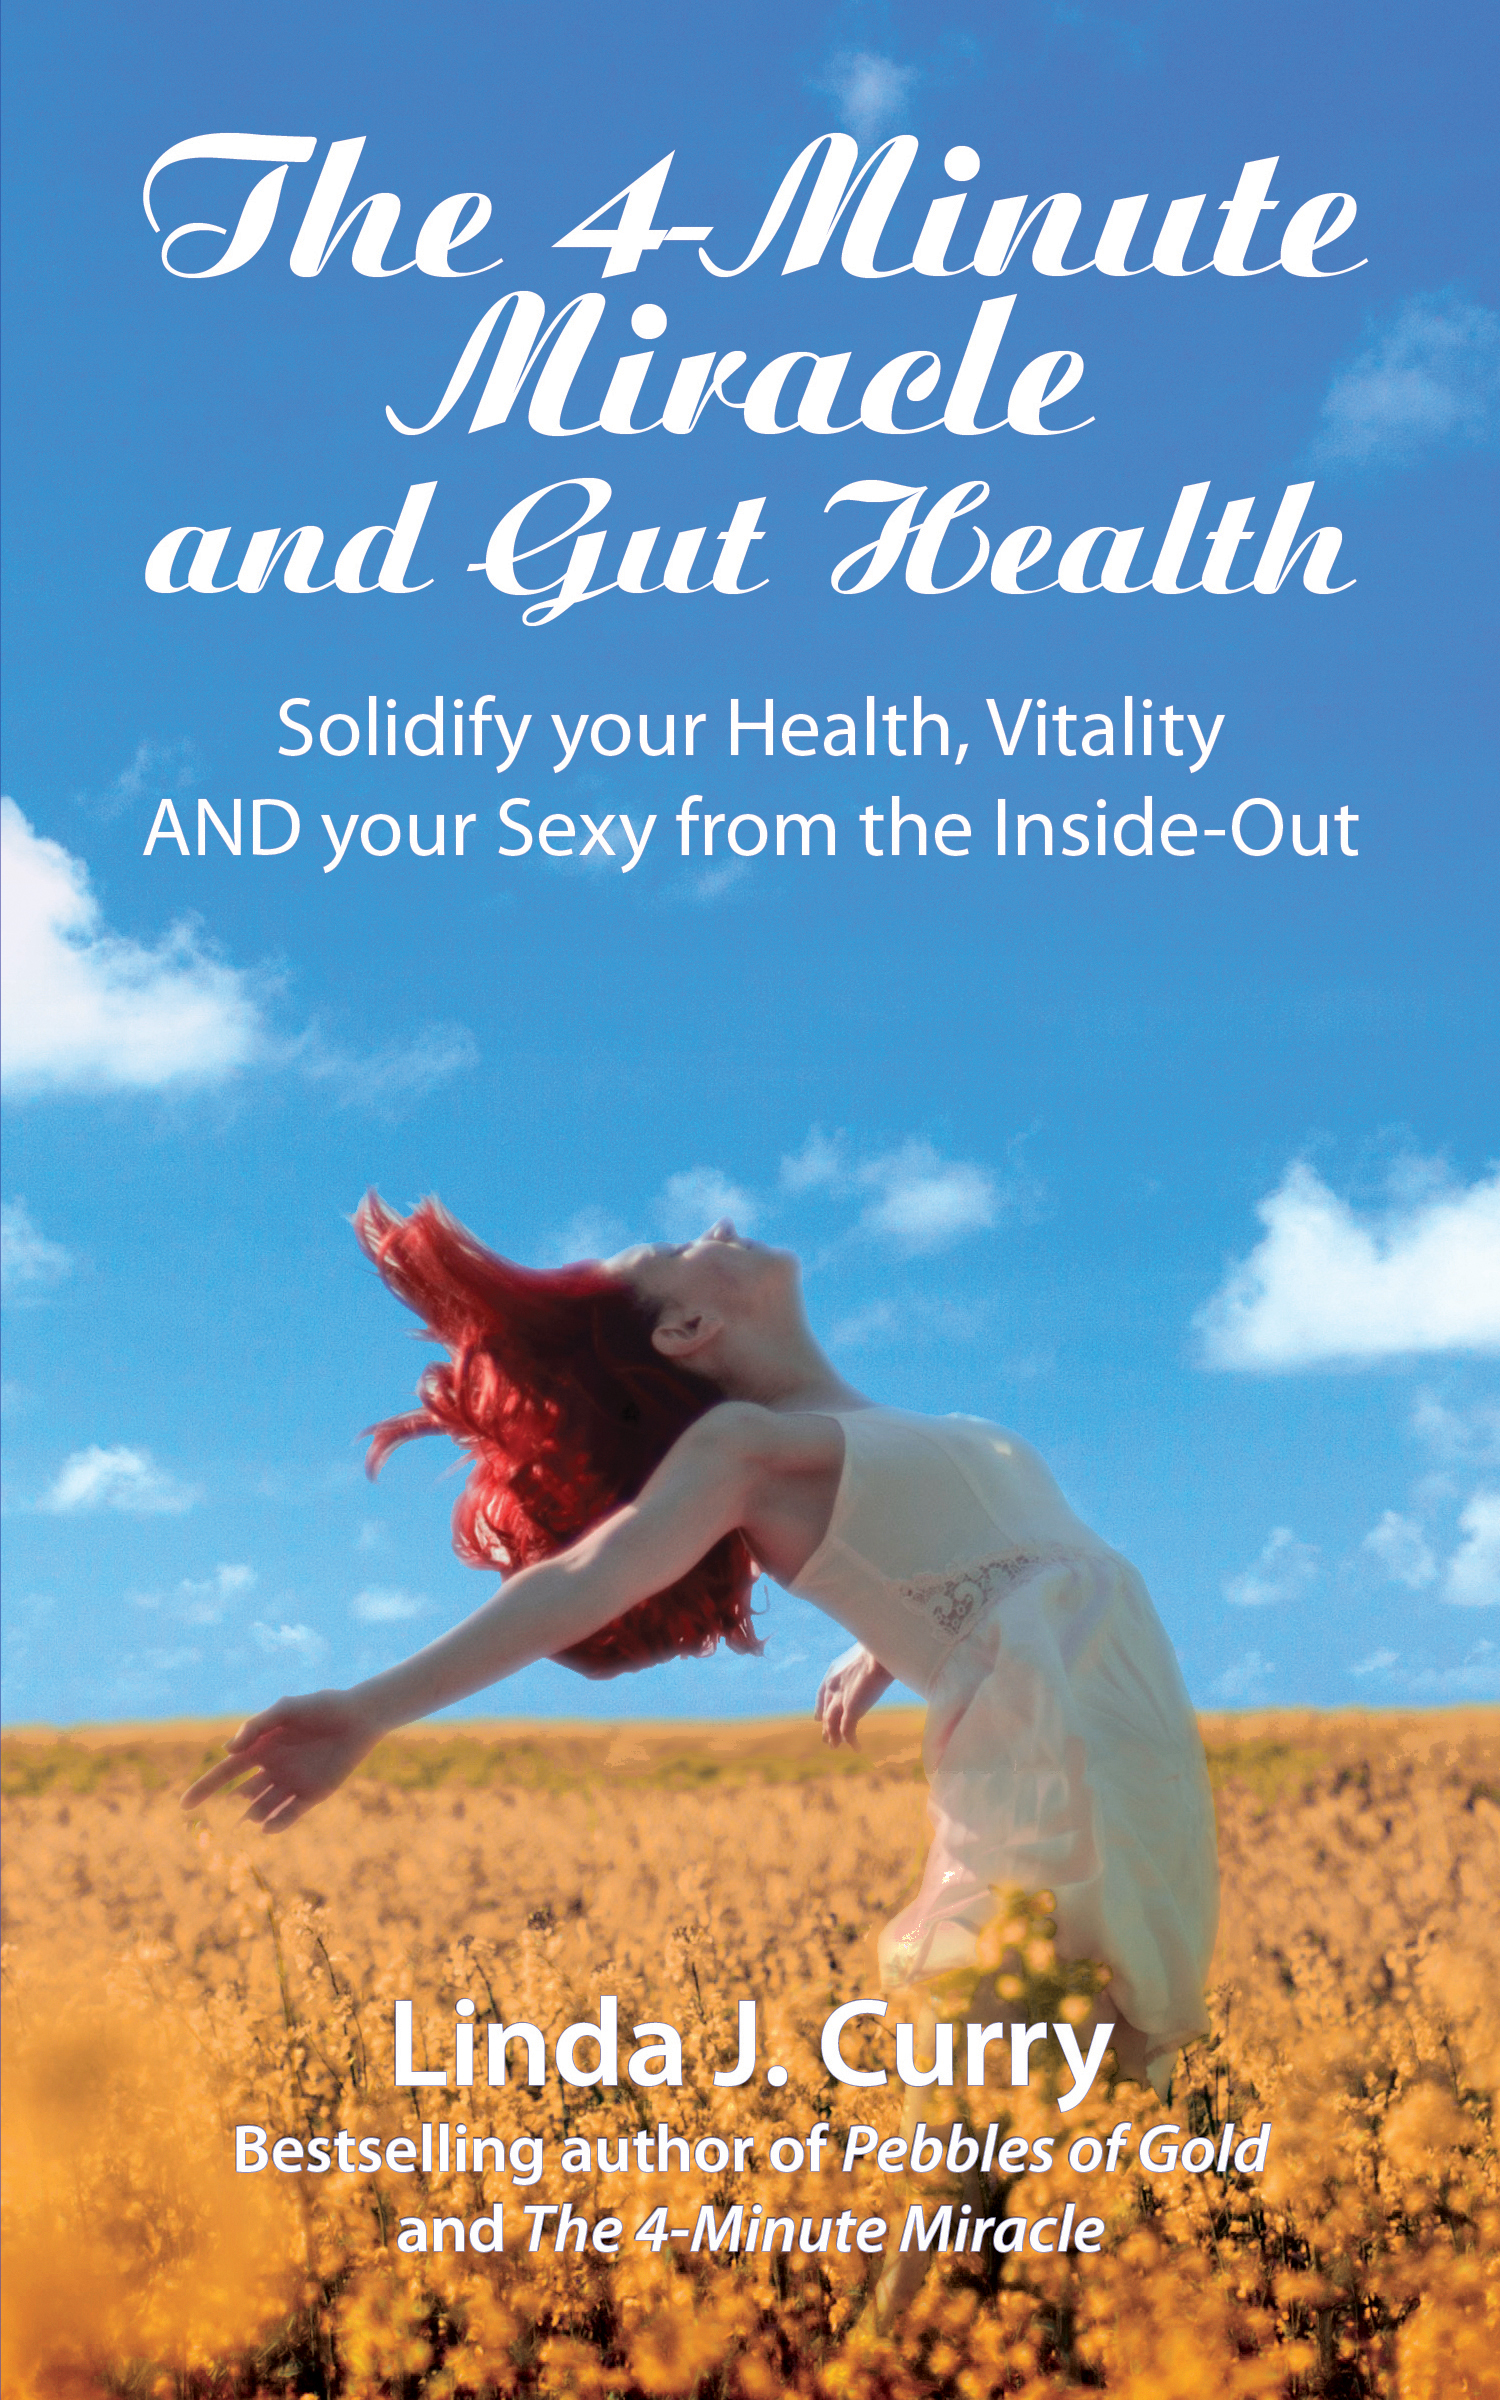 The 4-Minute Miracle and Gut Health by Linda J Curry